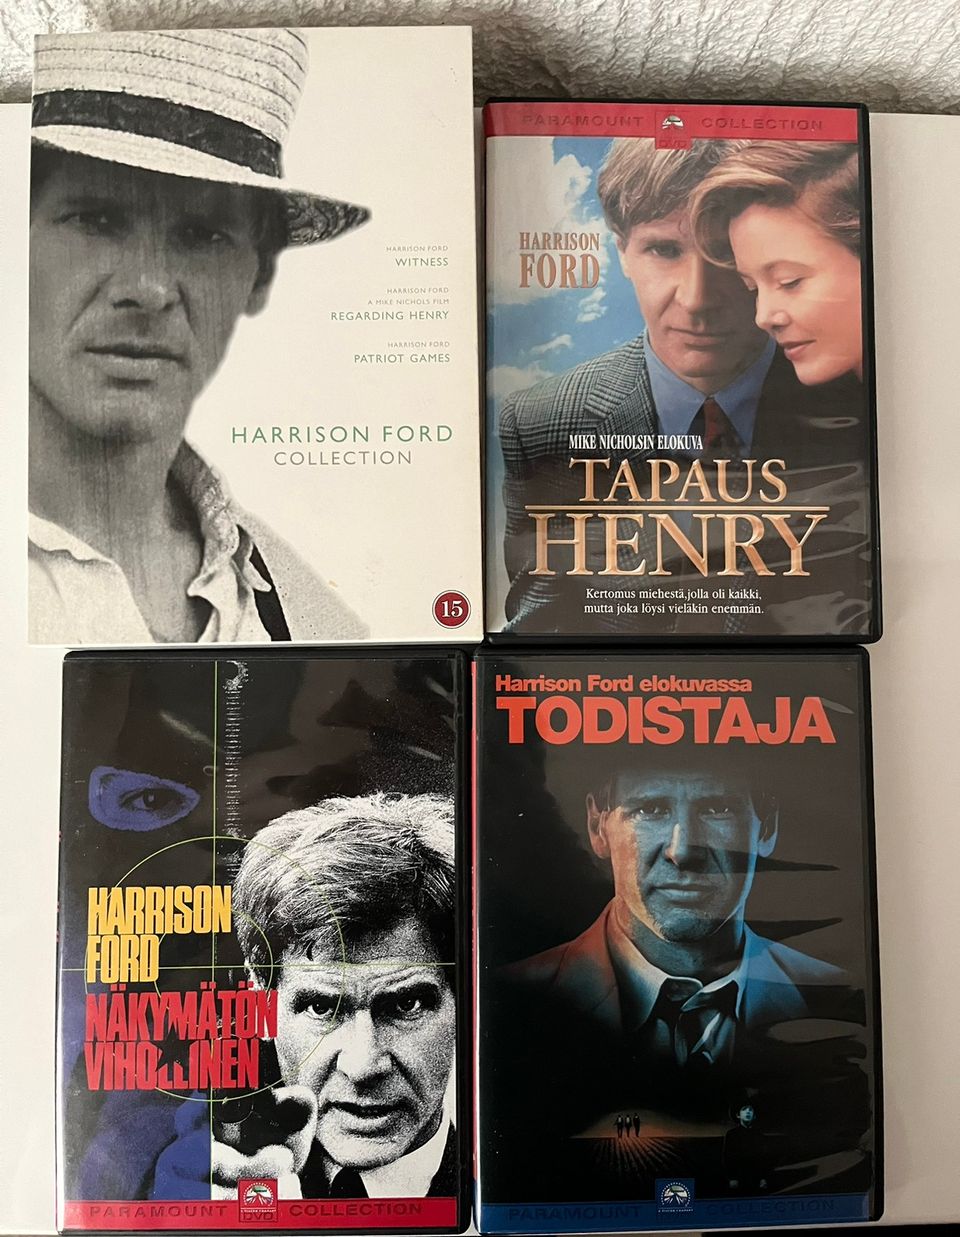 Harrison Ford DVD collection